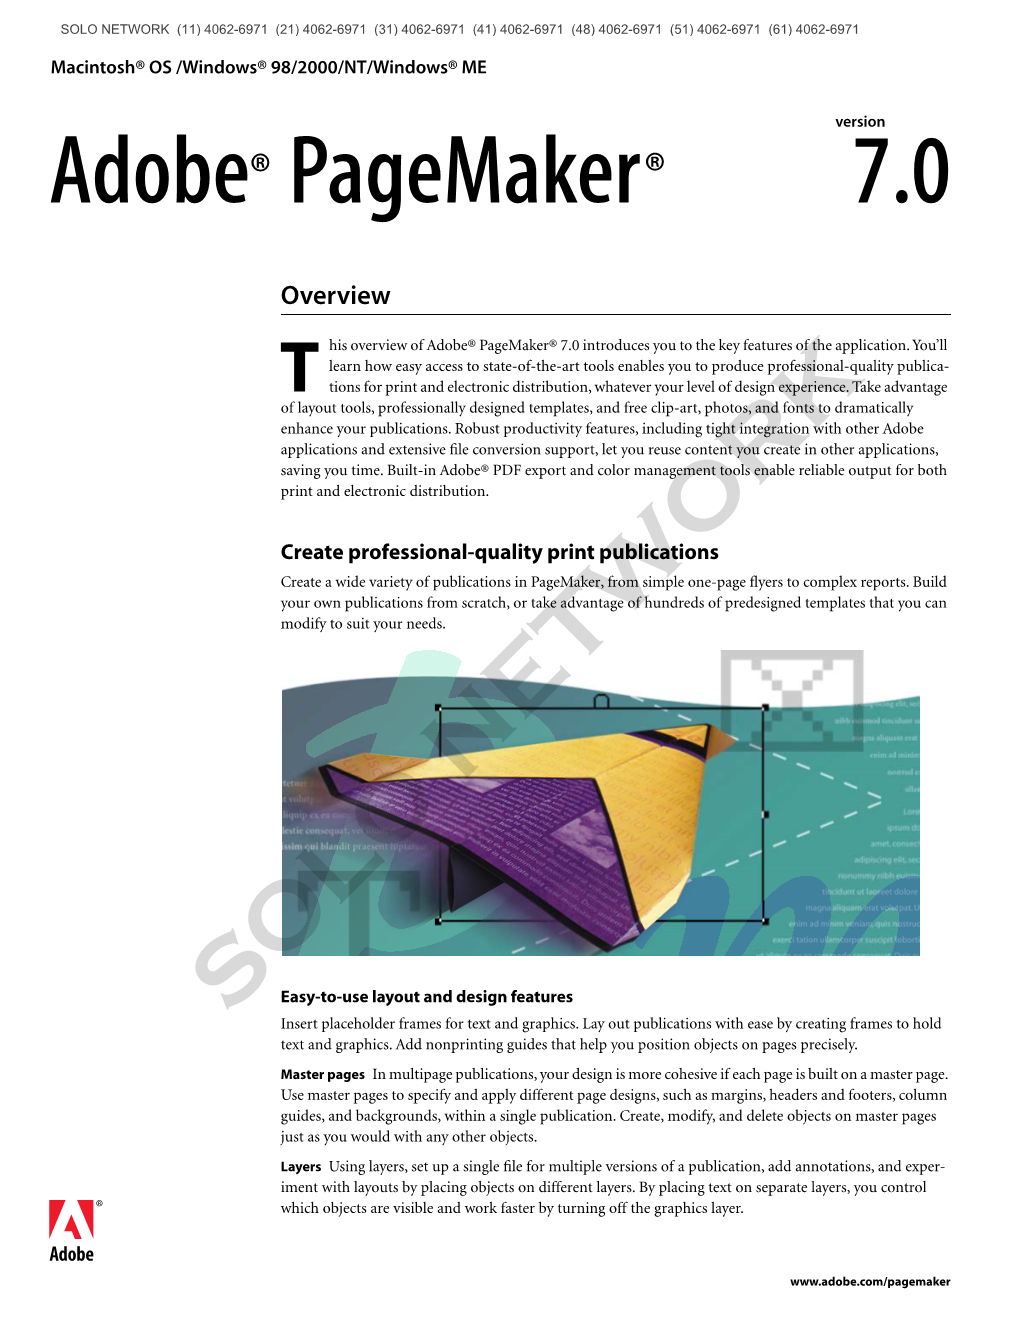 Adobe Pagemaker 7.0 | Solo Network